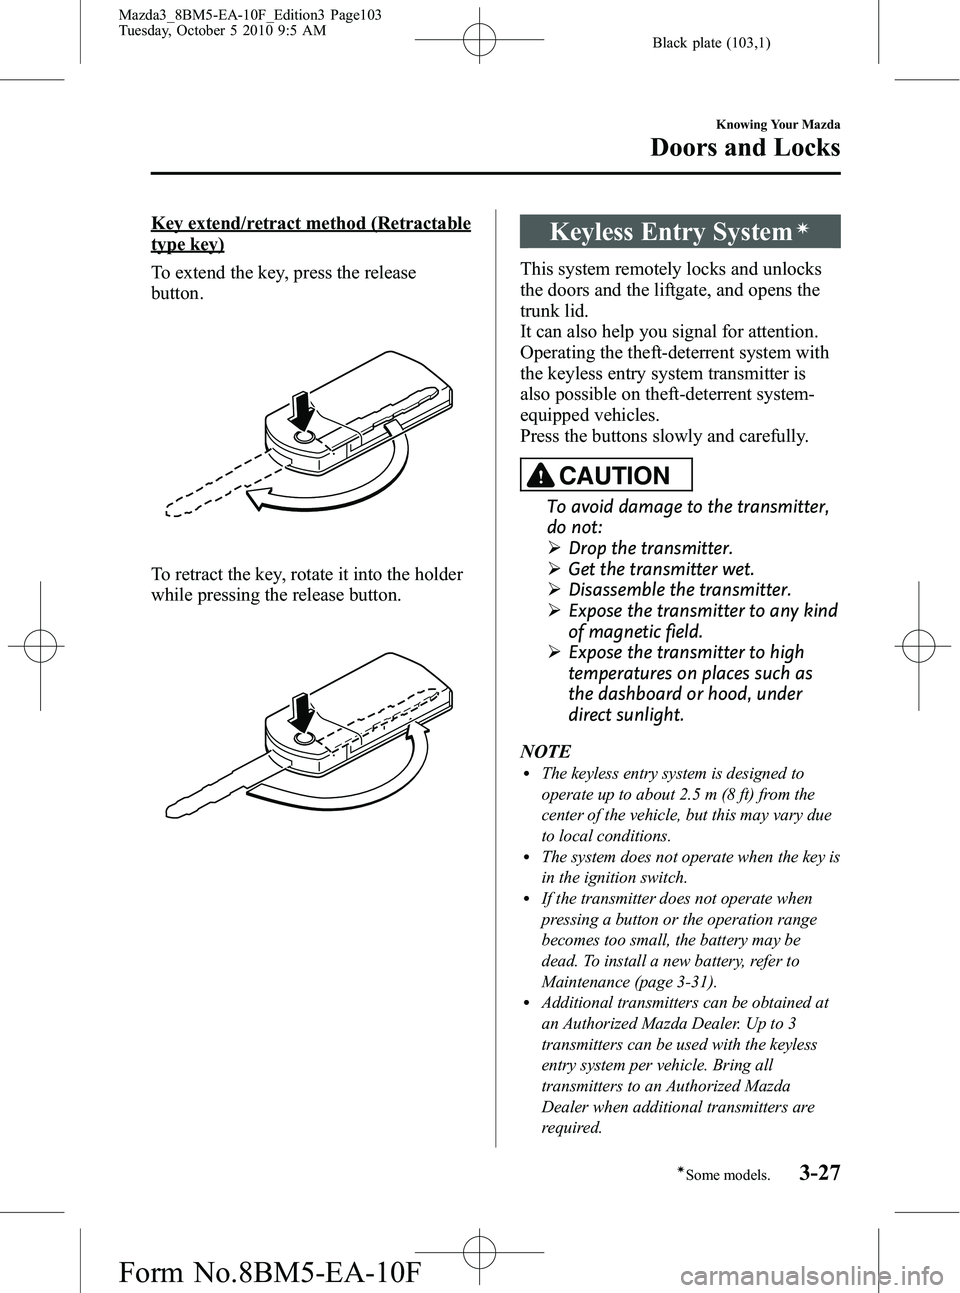 MAZDA MODEL 3 4-DOOR 2011  Owners Manual Black plate (103,1)
Key extend/retract method (Retractable
type key)
To extend the key, press the release
button.
To retract the key, rotate it into the holder
while pressing the release button.
Keyle